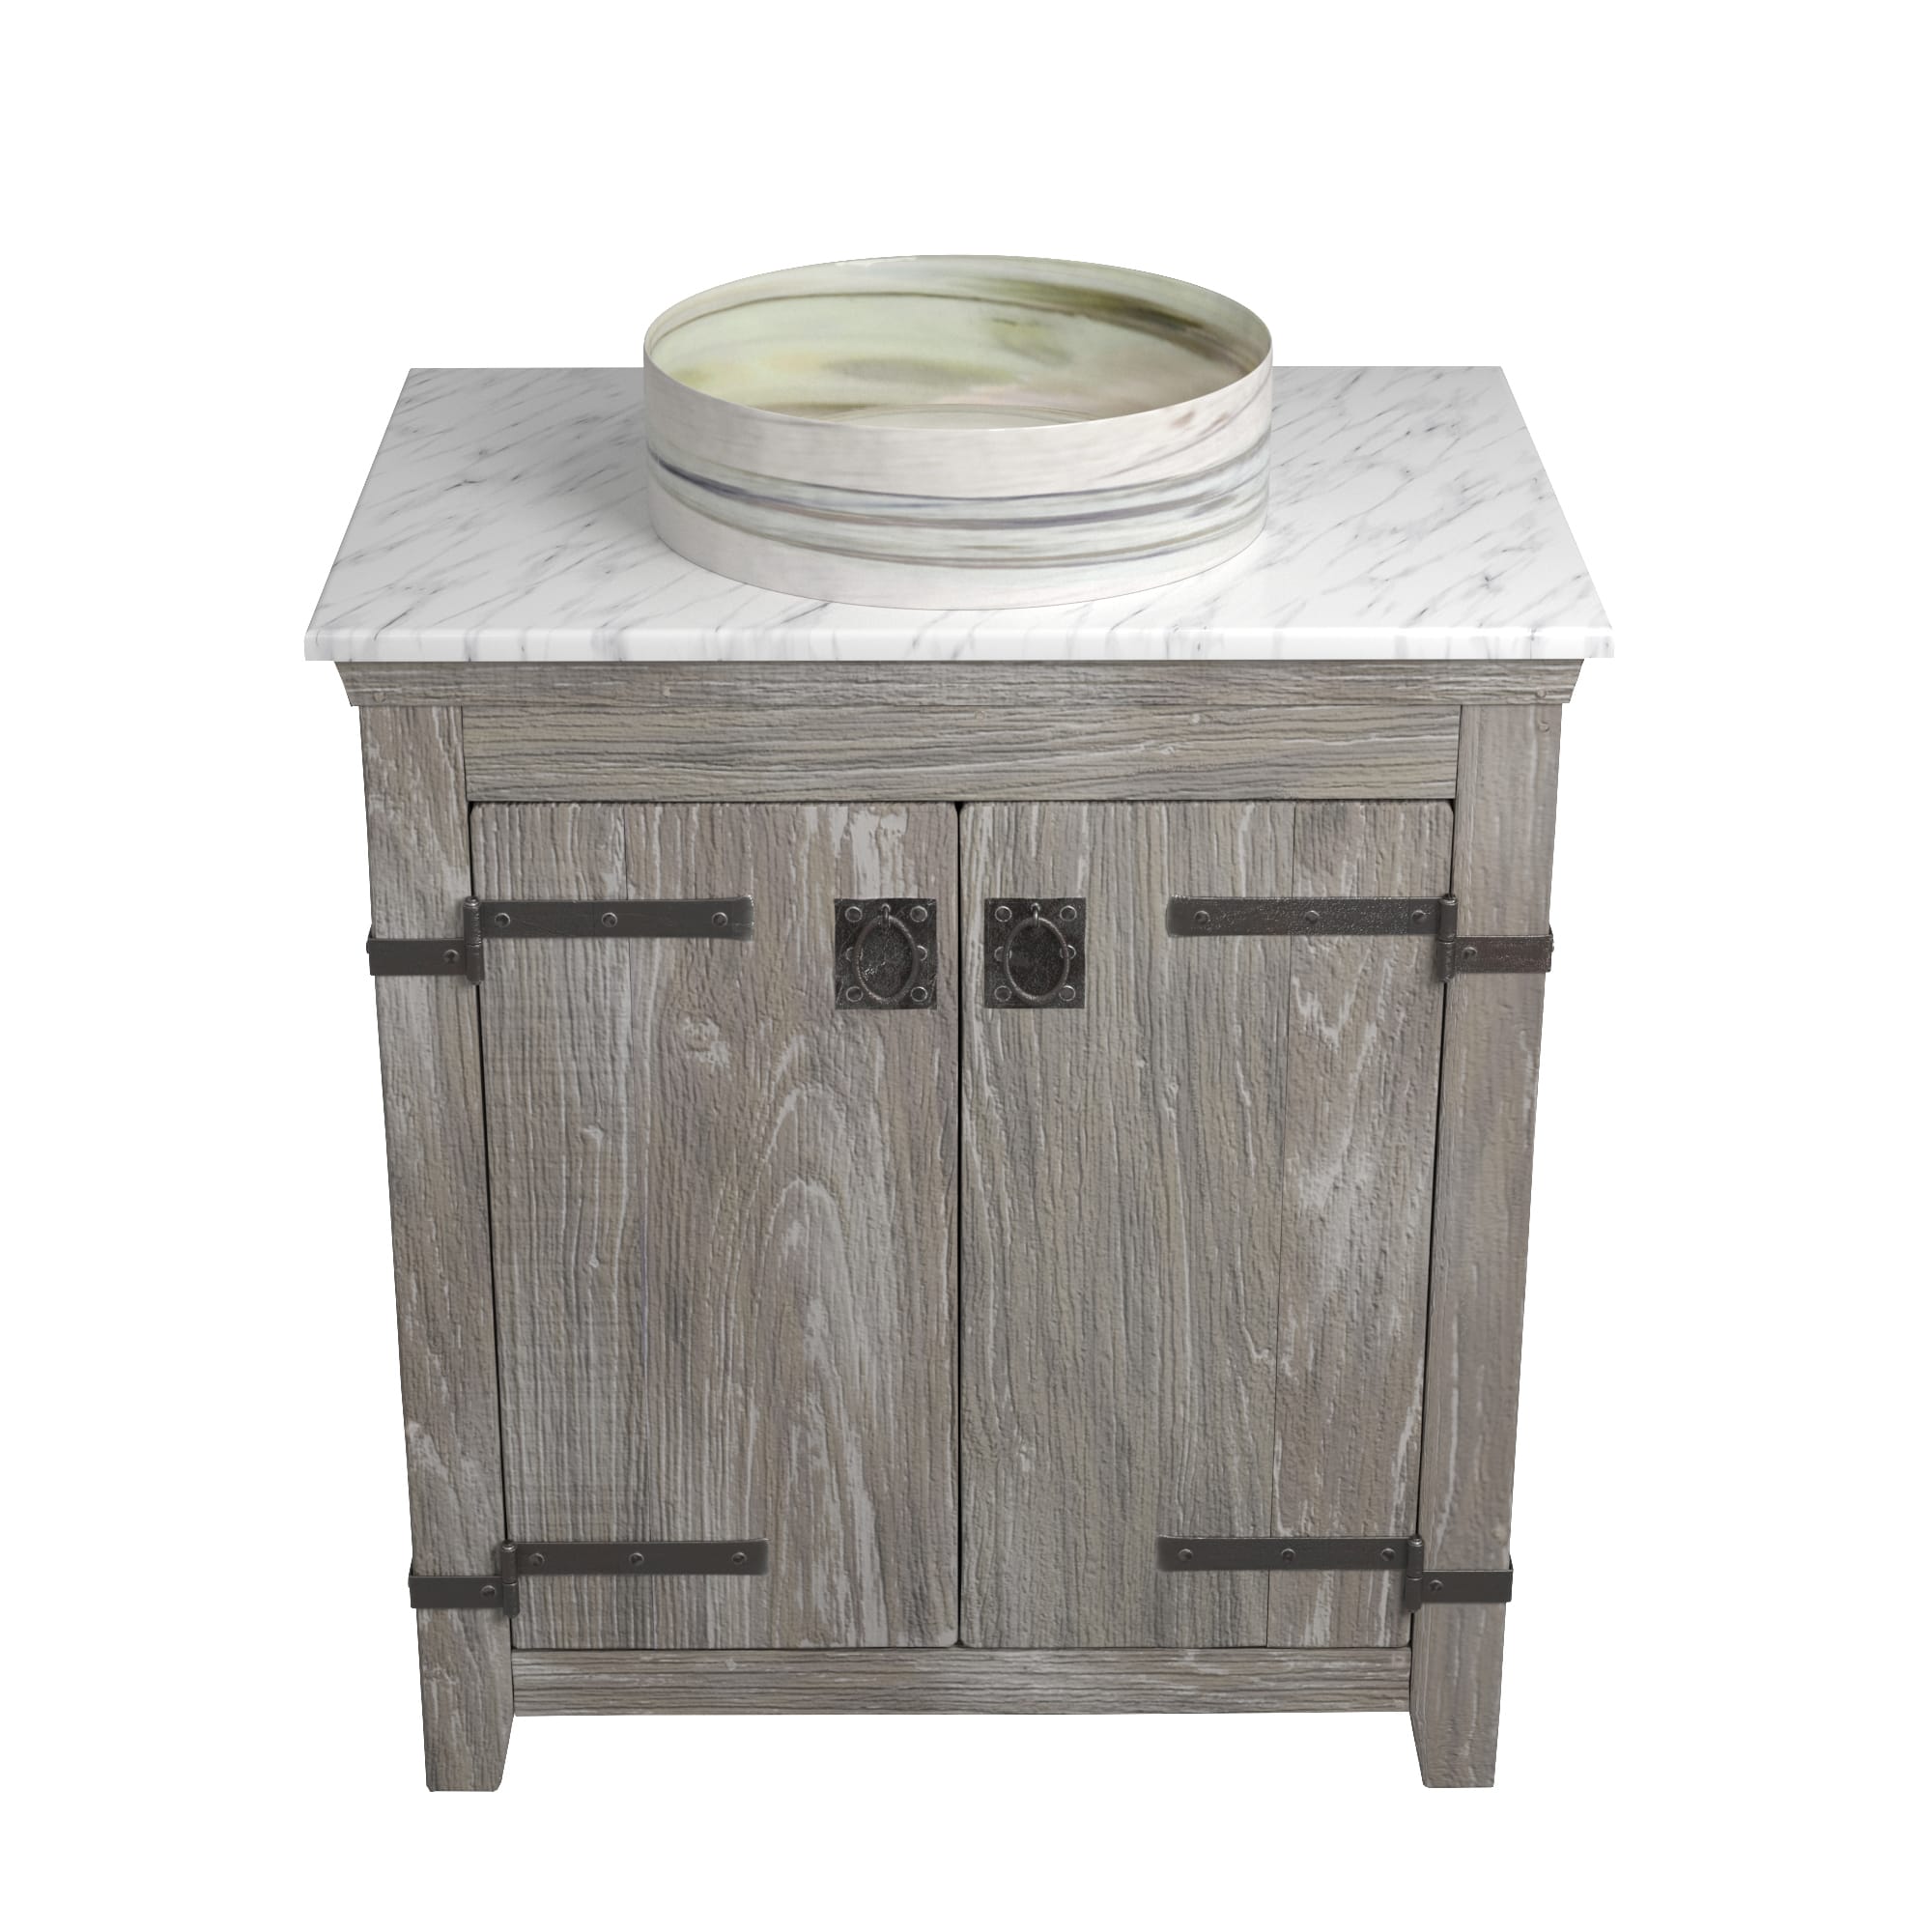 Native Trails 30" Americana Vanity in Driftwood with Carrara Marble Top and Positano in Abalone, No Faucet Hole, BND30-VB-CT-MG-040